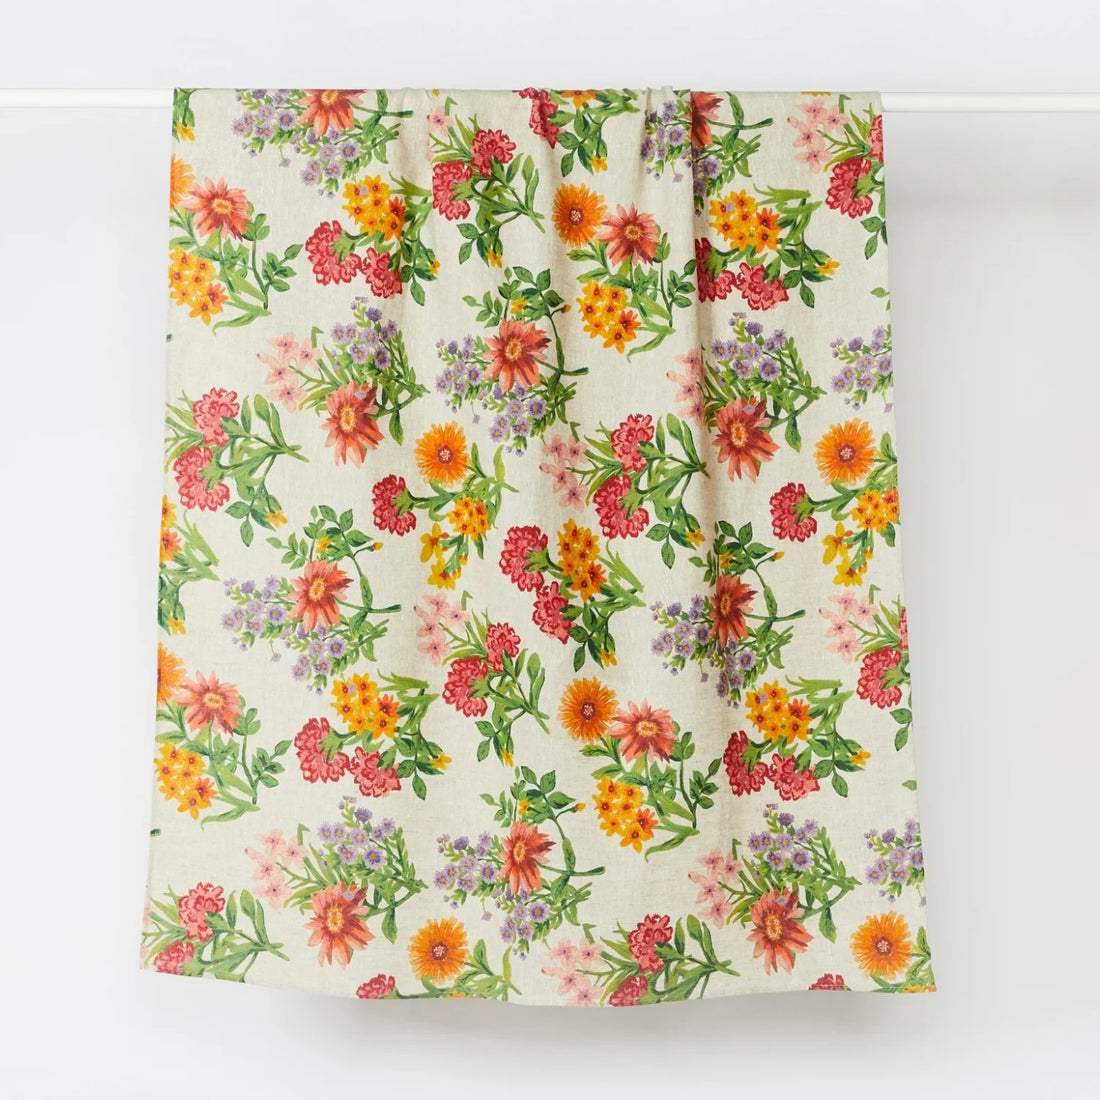 Bonnie and Neil - Posy Multi Tablecloth - The Flower Crate